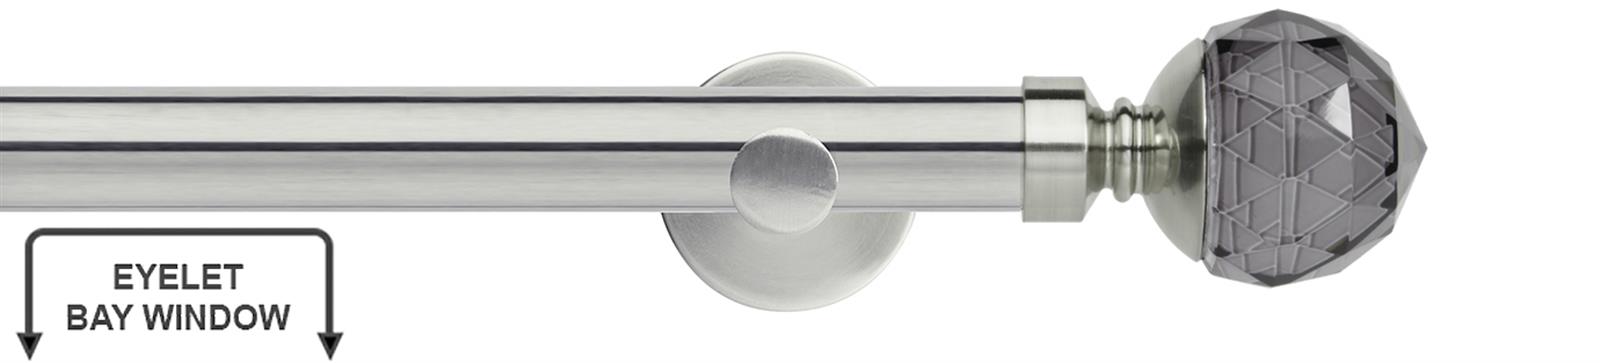 Neo Premium 28mm Eyelet Bay Window Pole Stainless Steel Grey Faceted Ball